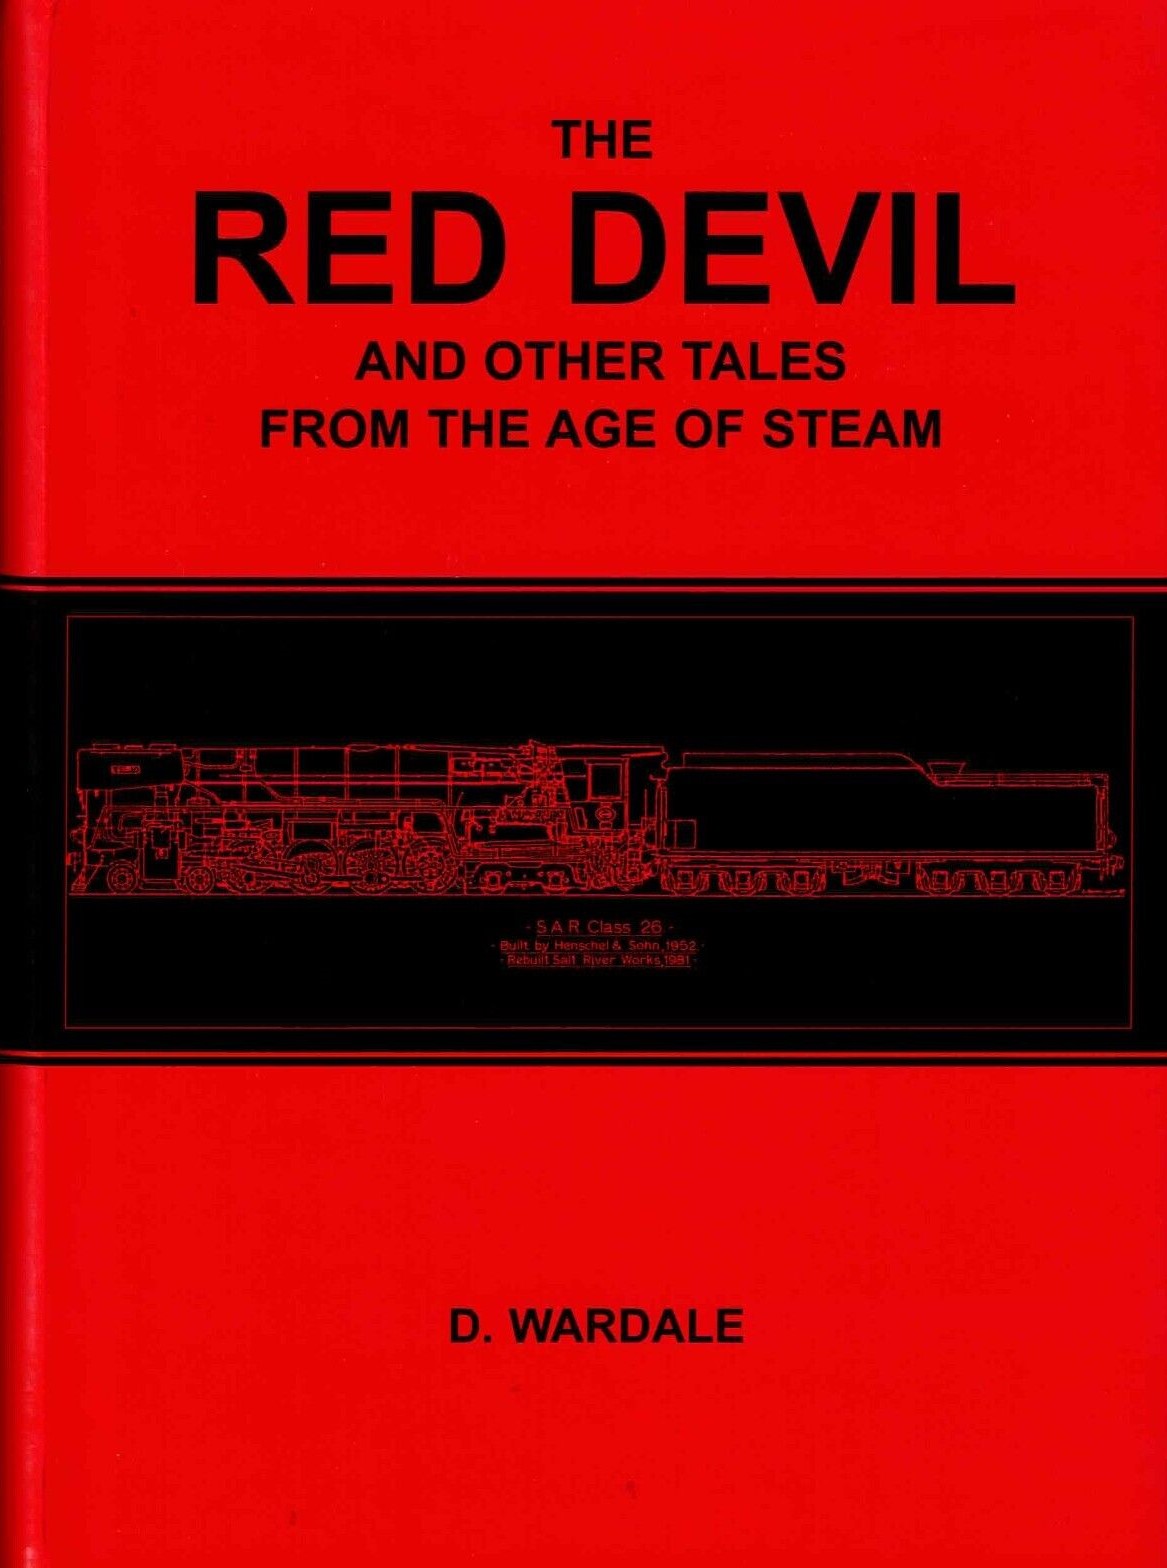 The Red Devil and other tales from the Age of Steam